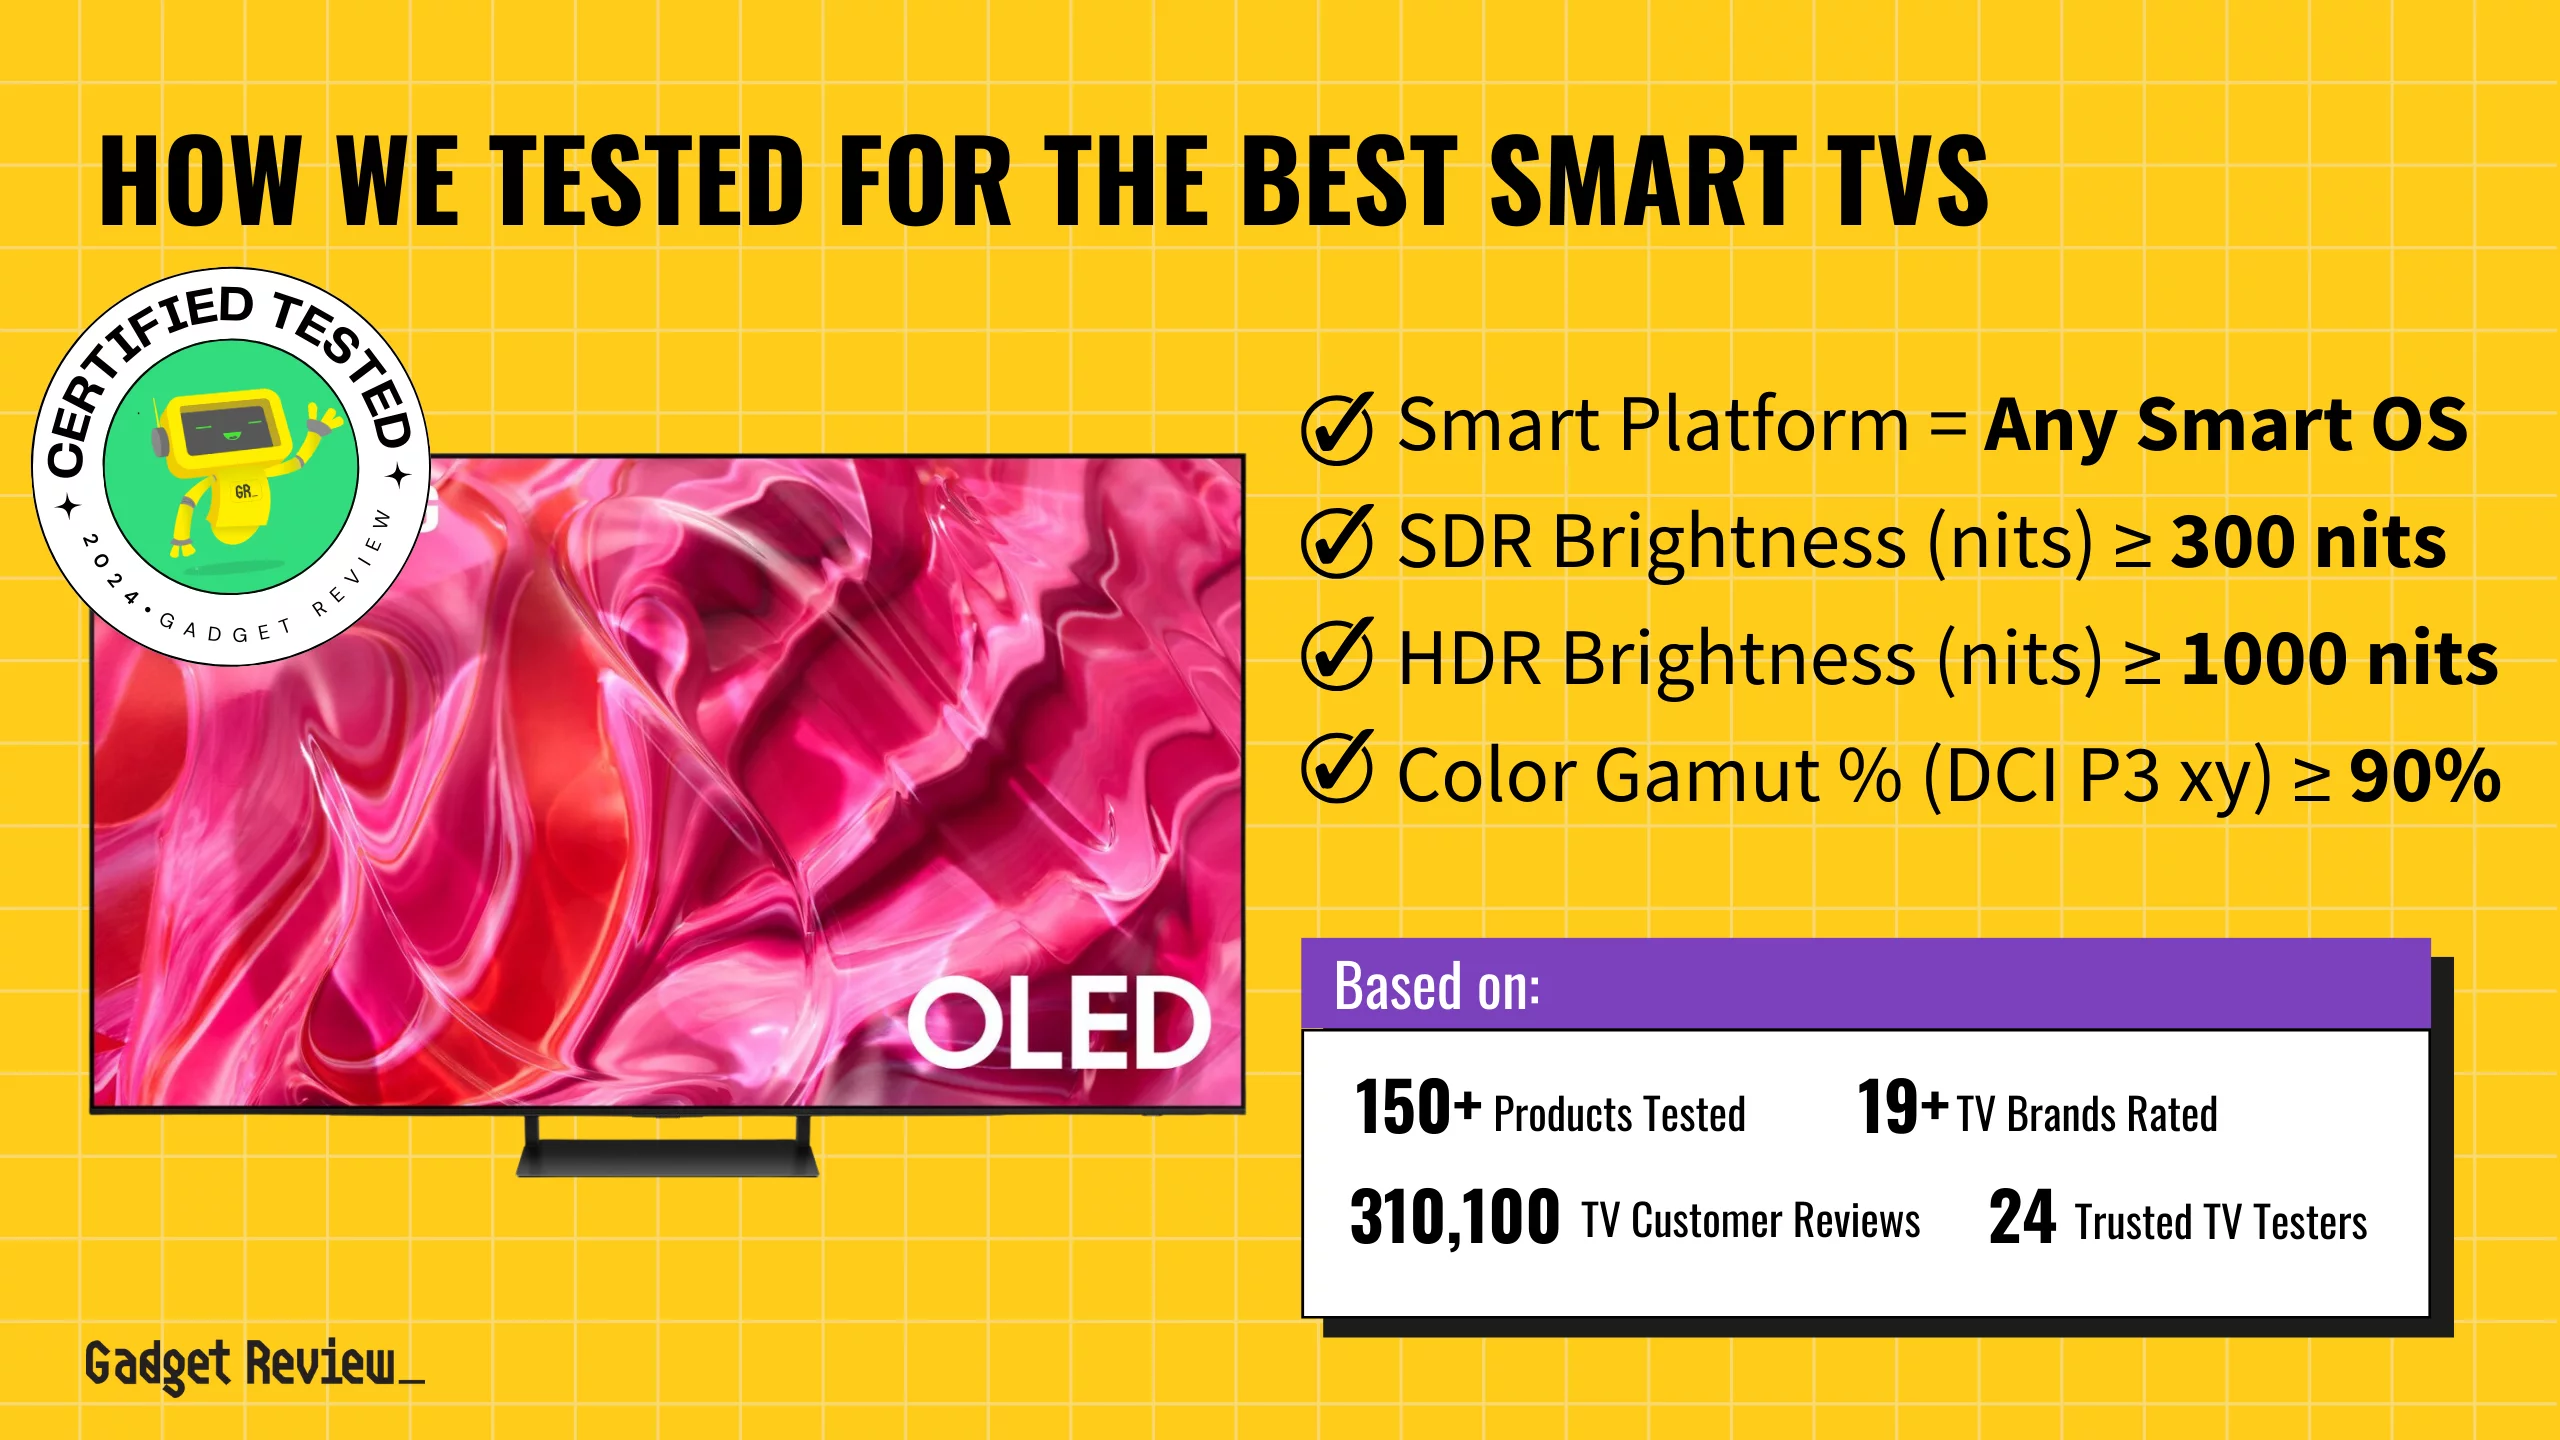 What’s the Best Smart TV? 4 Options Ranked